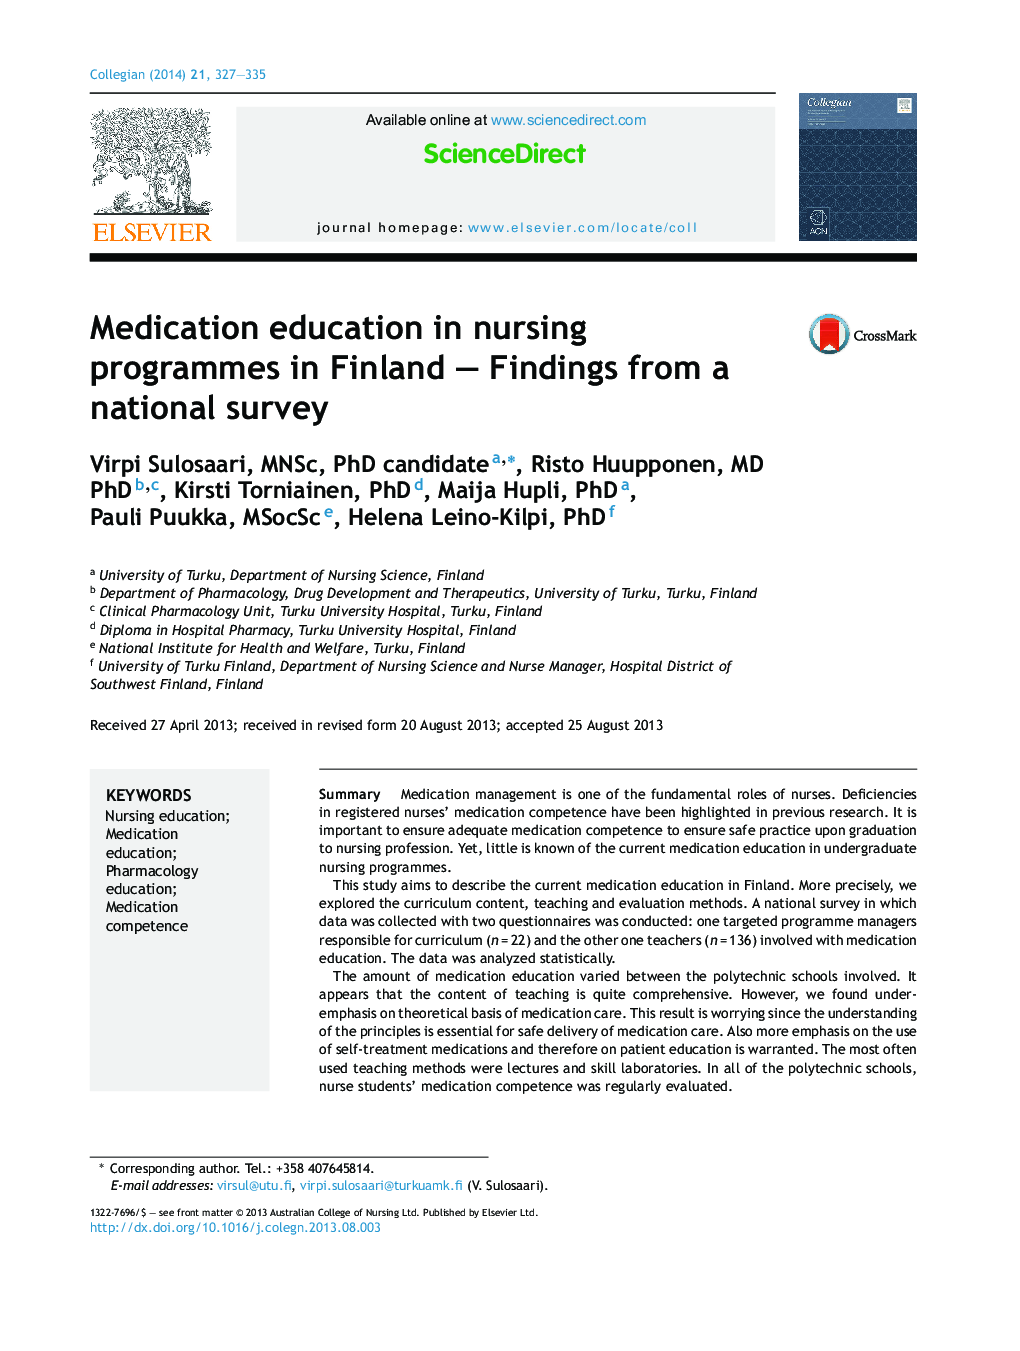 Medication education in nursing programmes in Finland – Findings from a national survey